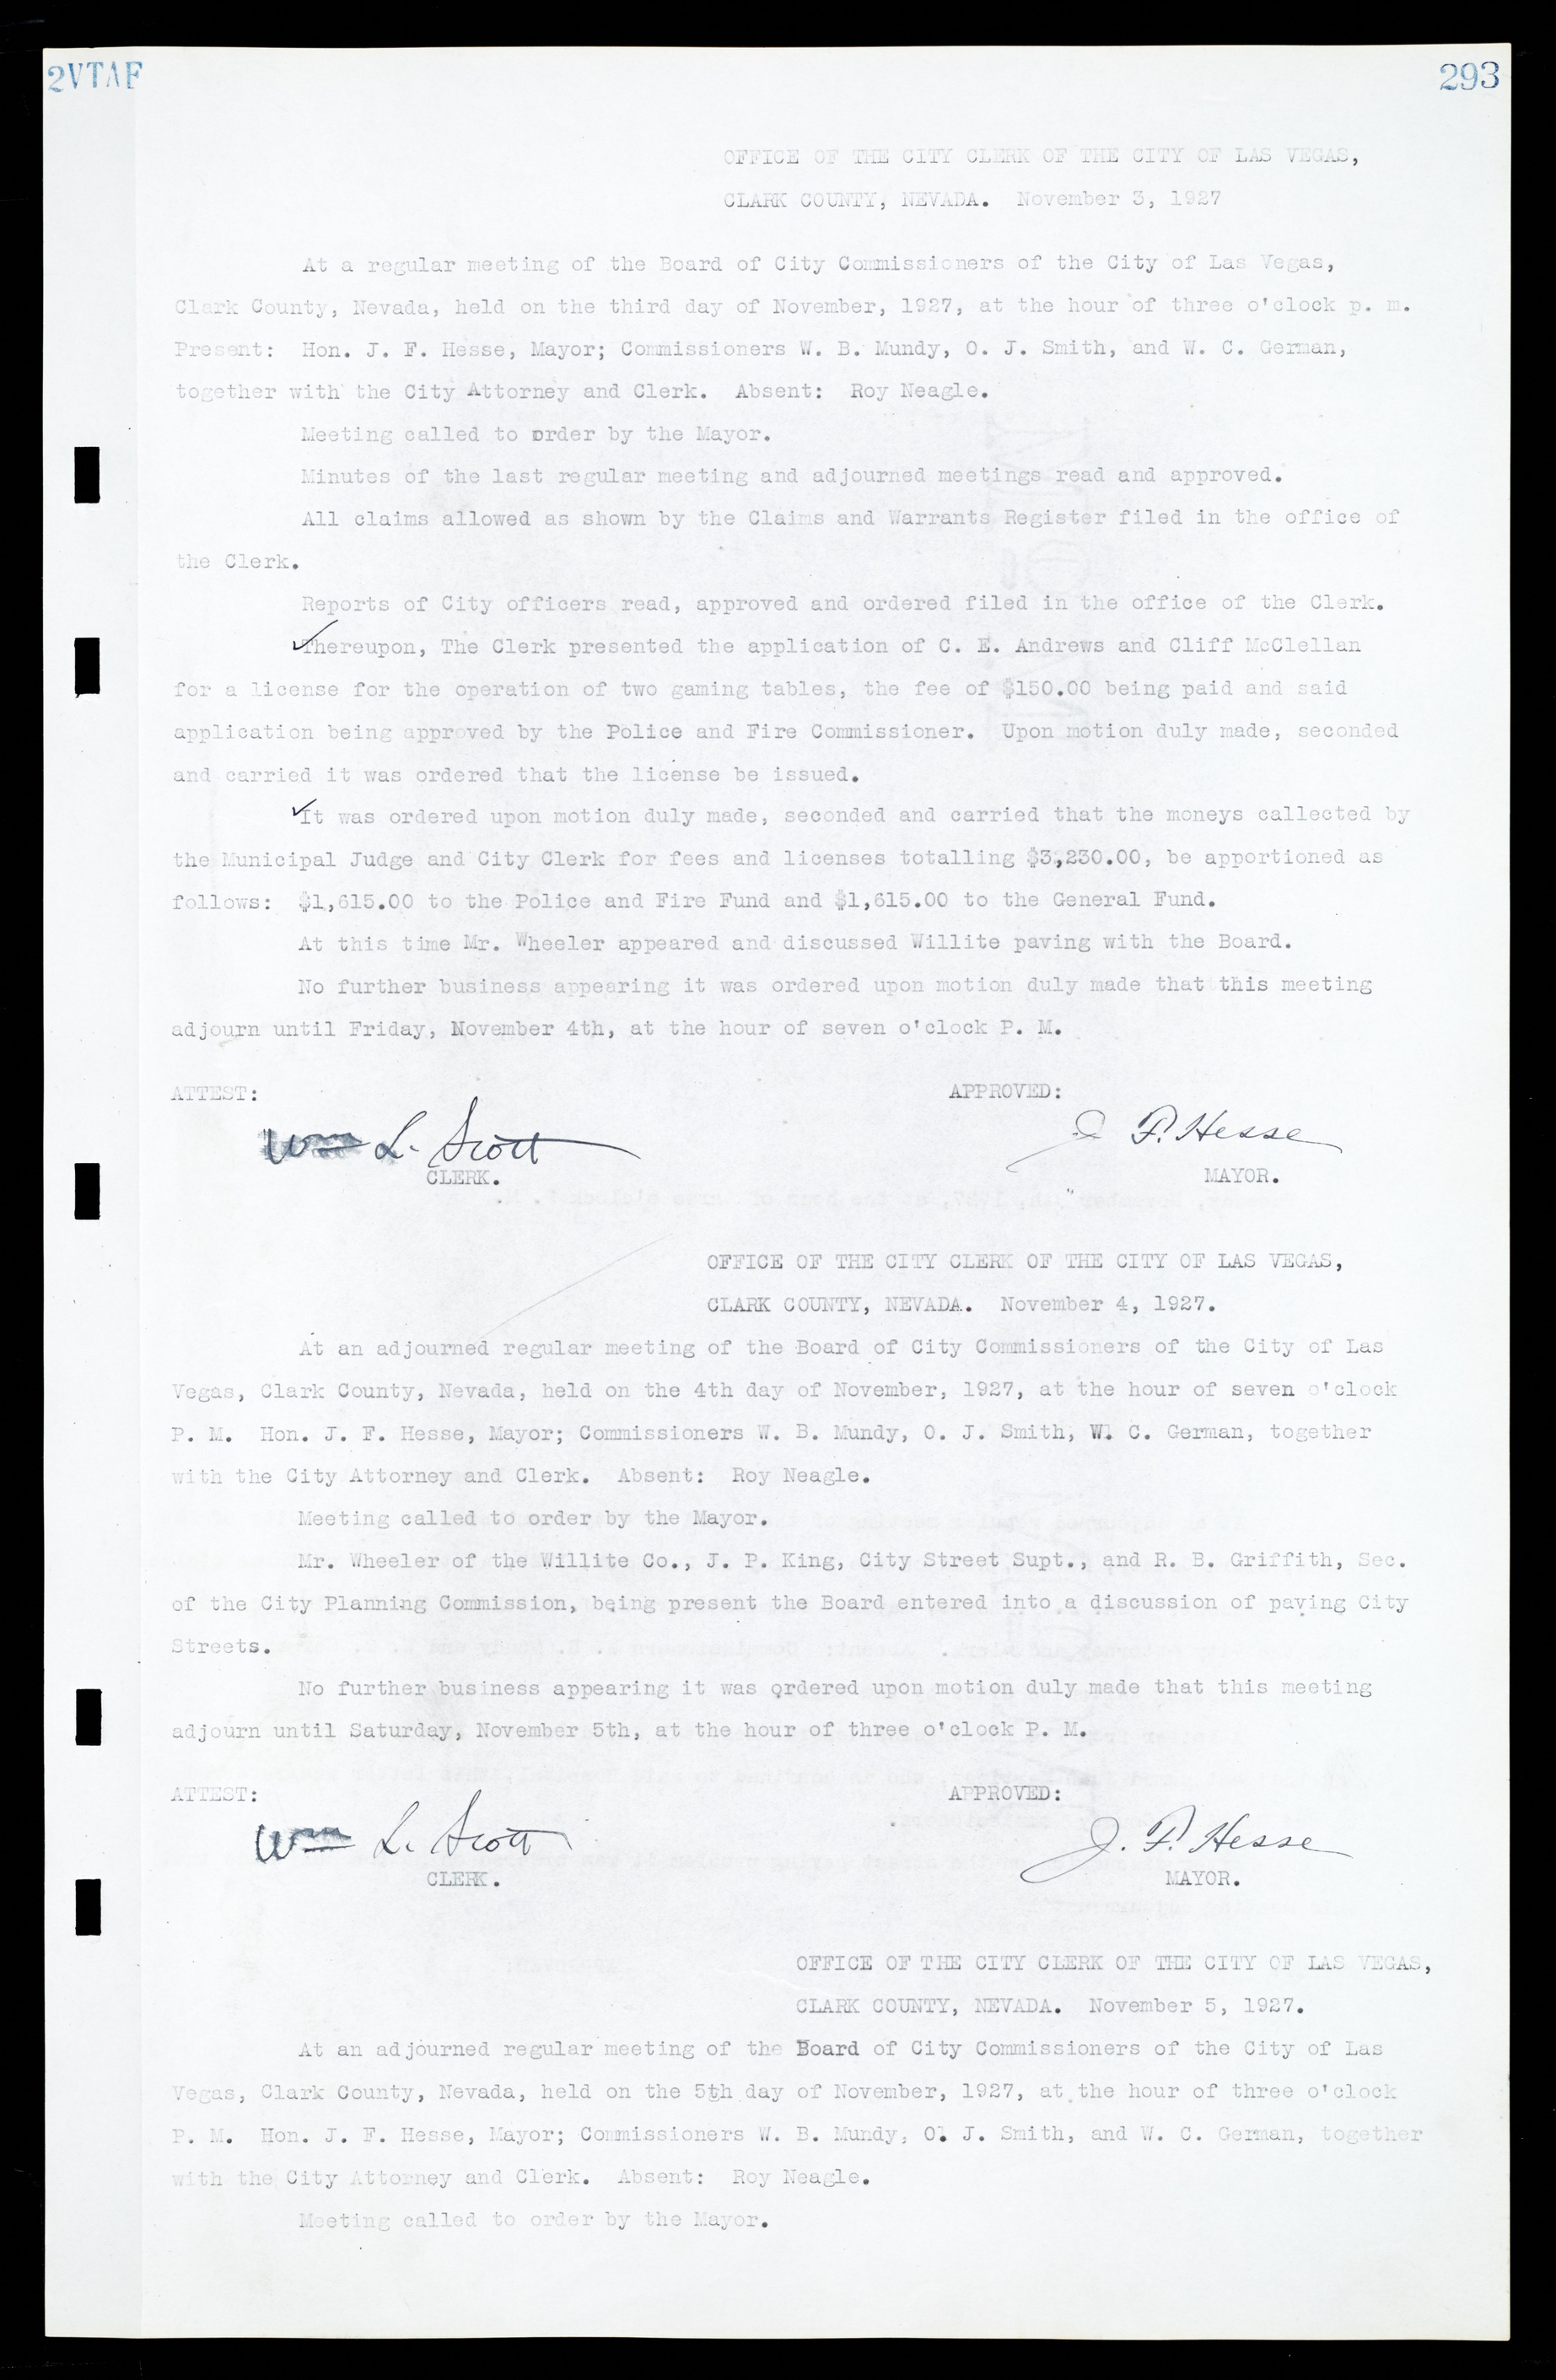 Las Vegas City Commission Minutes, March 1, 1922 to May 10, 1929, lvc000002-302